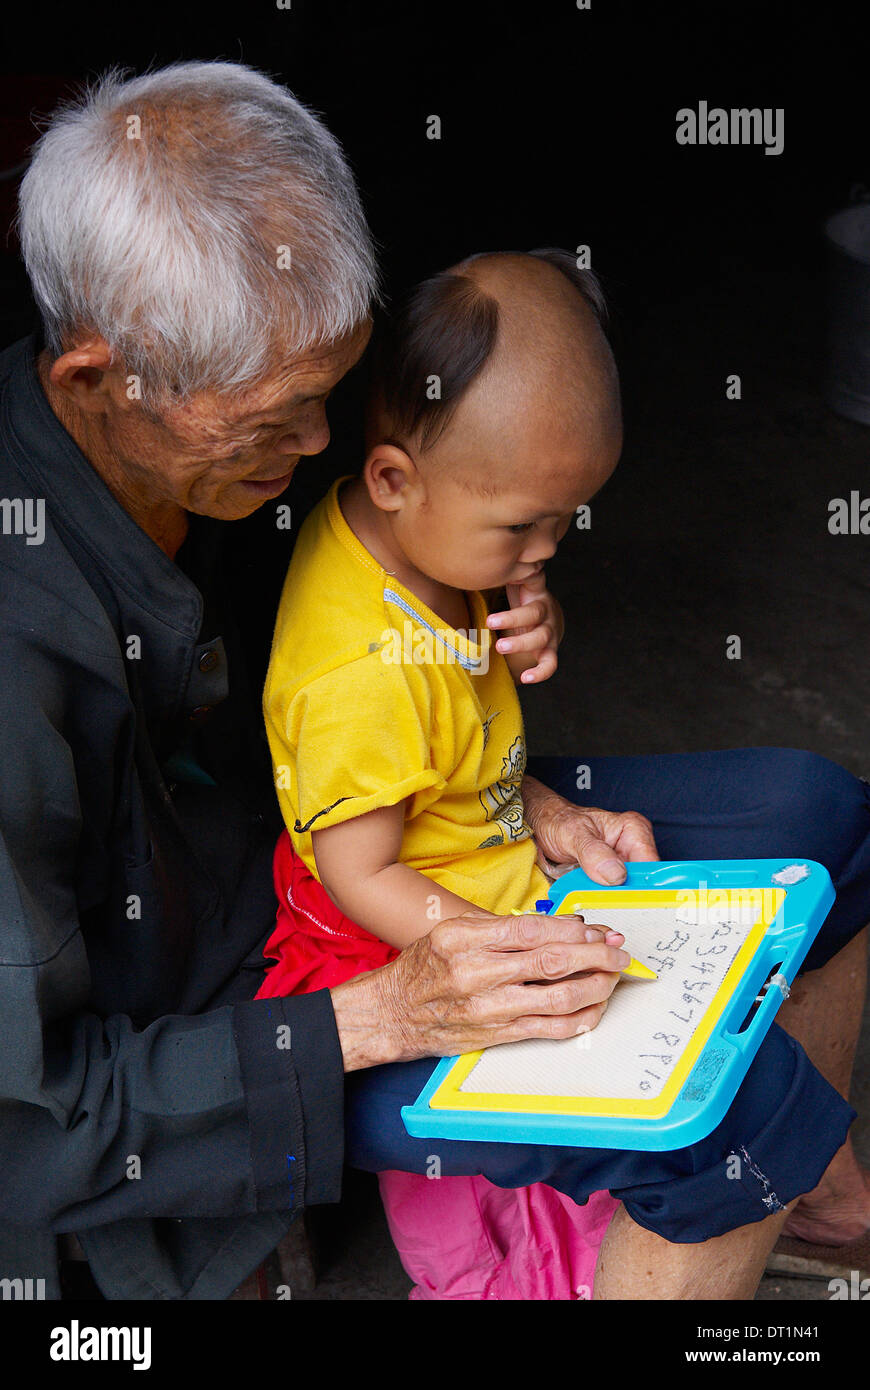 Grandfather and  child, Dong village of Zhaoxing, Guizhou Province, China, Asia Stock Photo